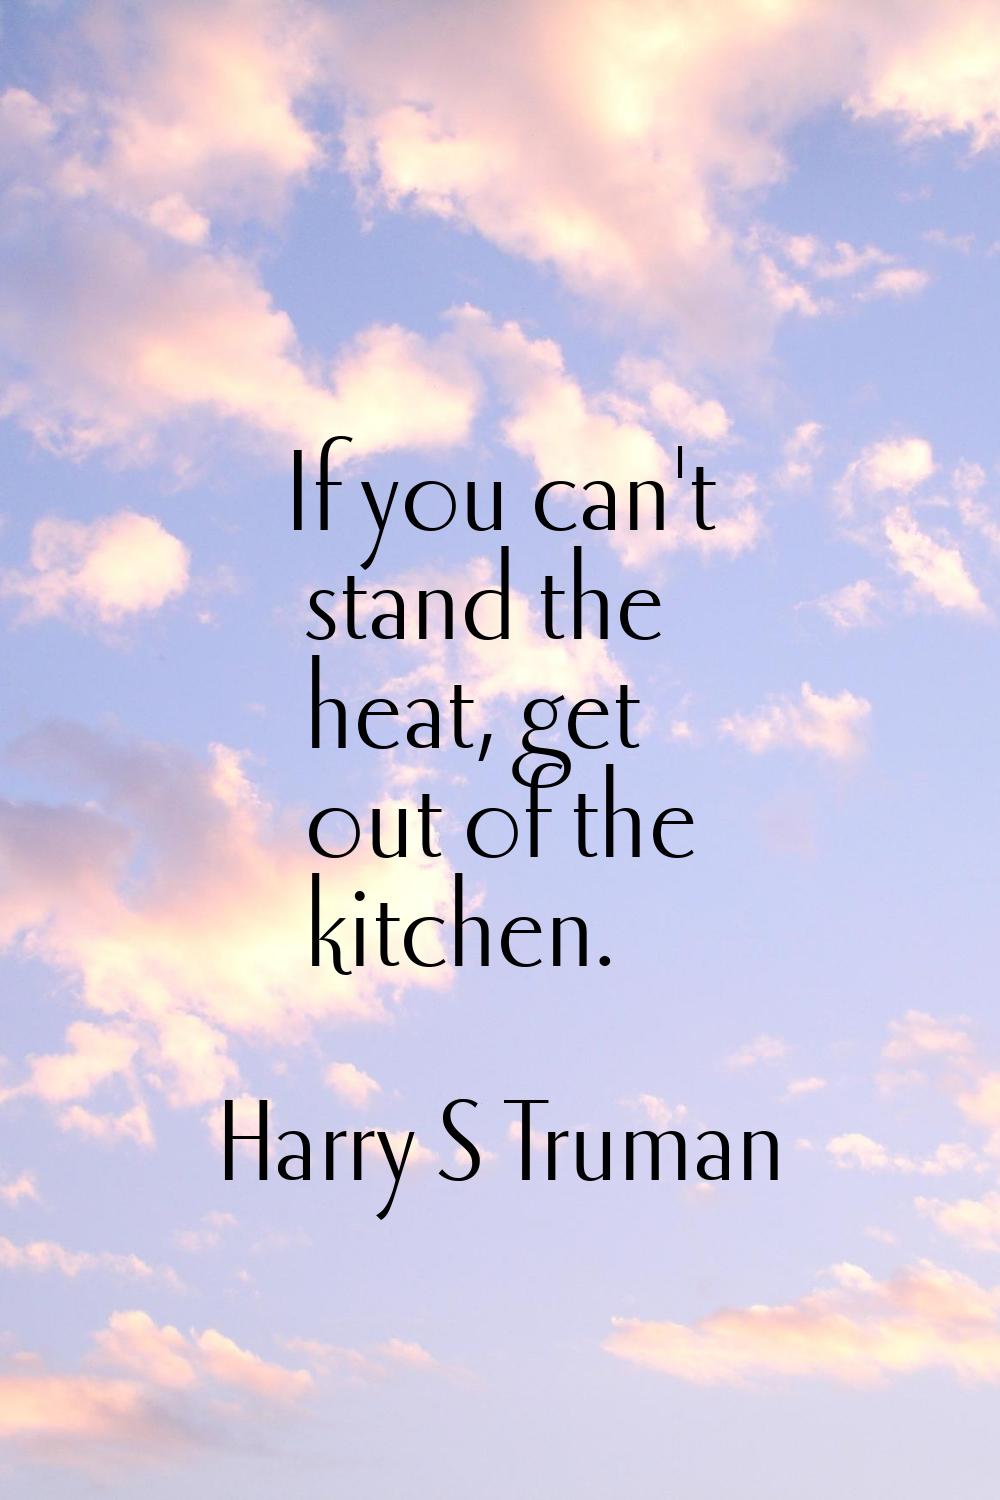 If you can't stand the heat, get out of the kitchen.